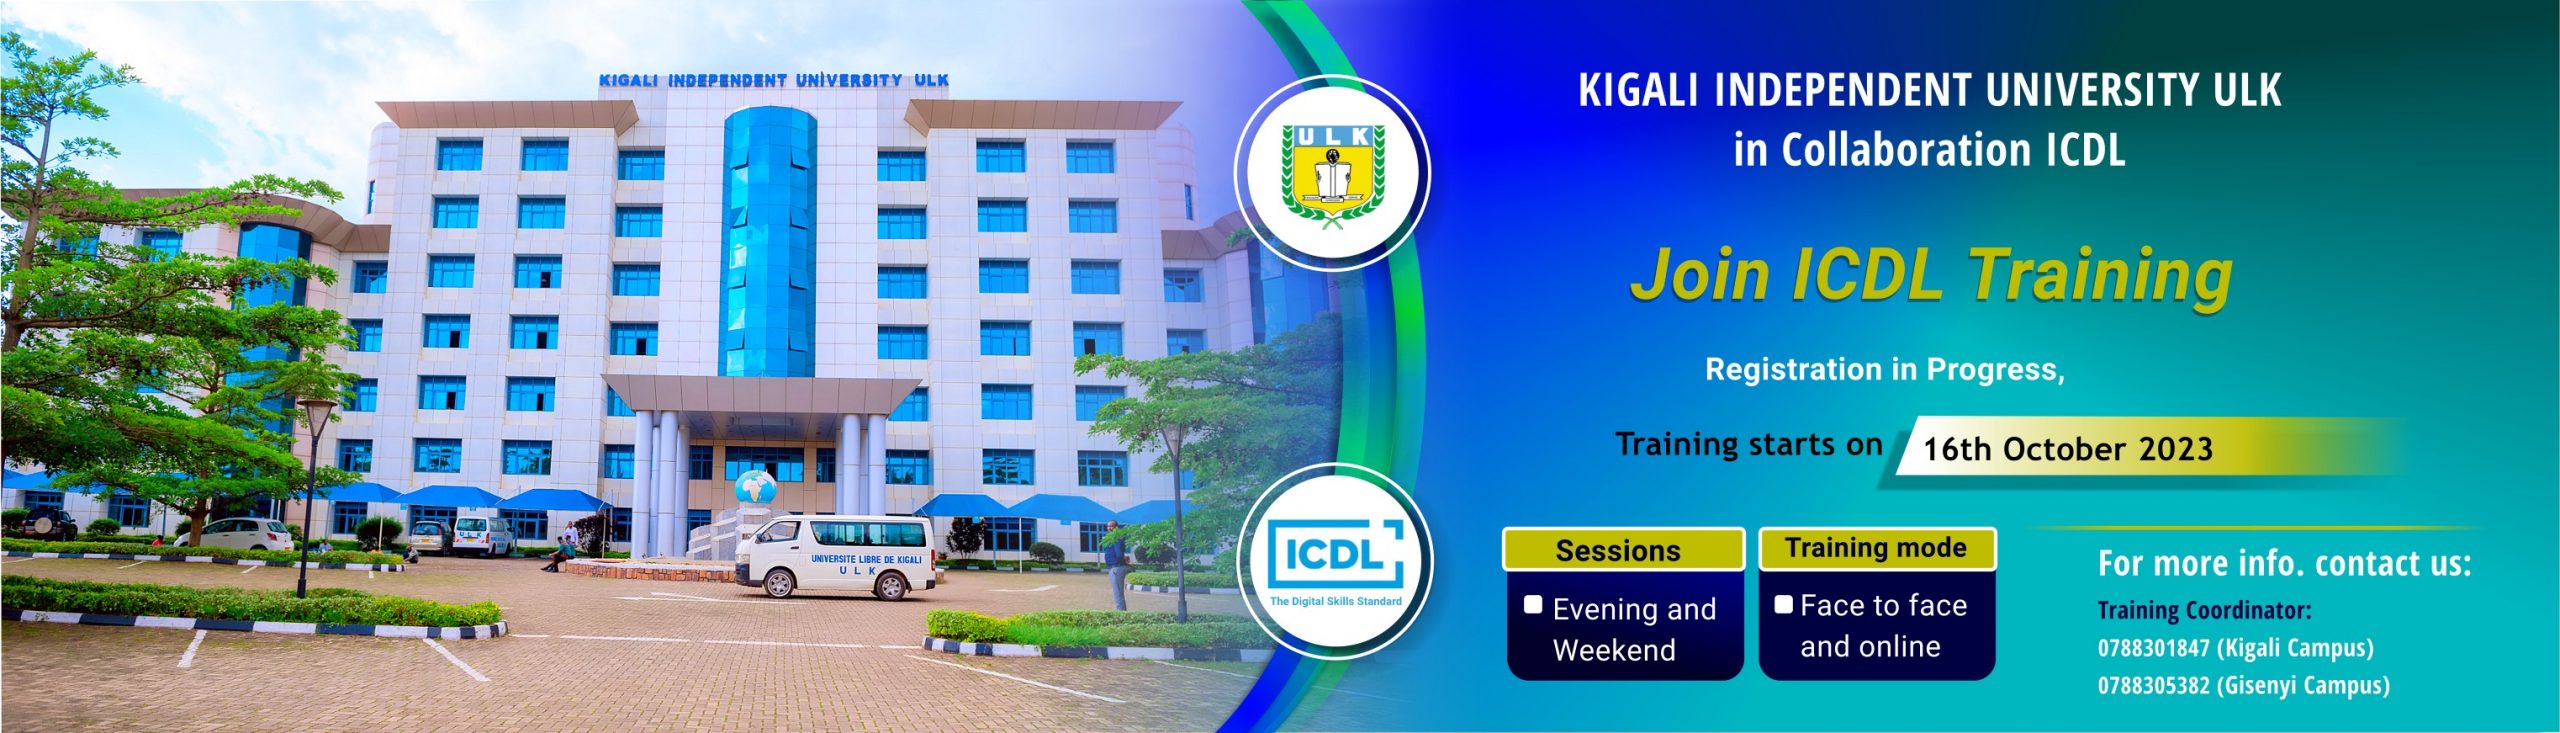 Join ICDL Training